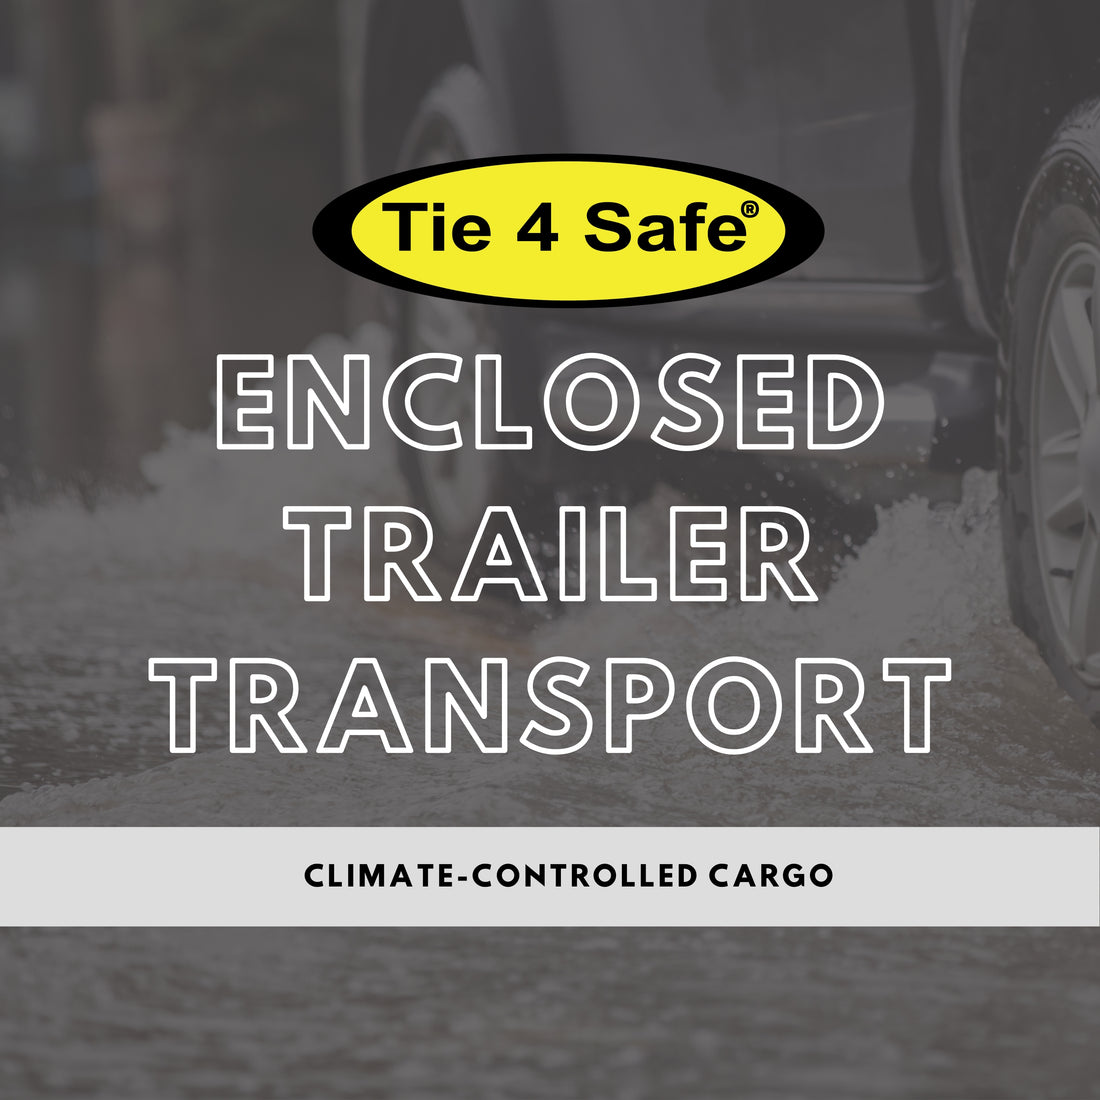 Climate-Controlled Cargo: Tips for Enclosed Trailer Transport